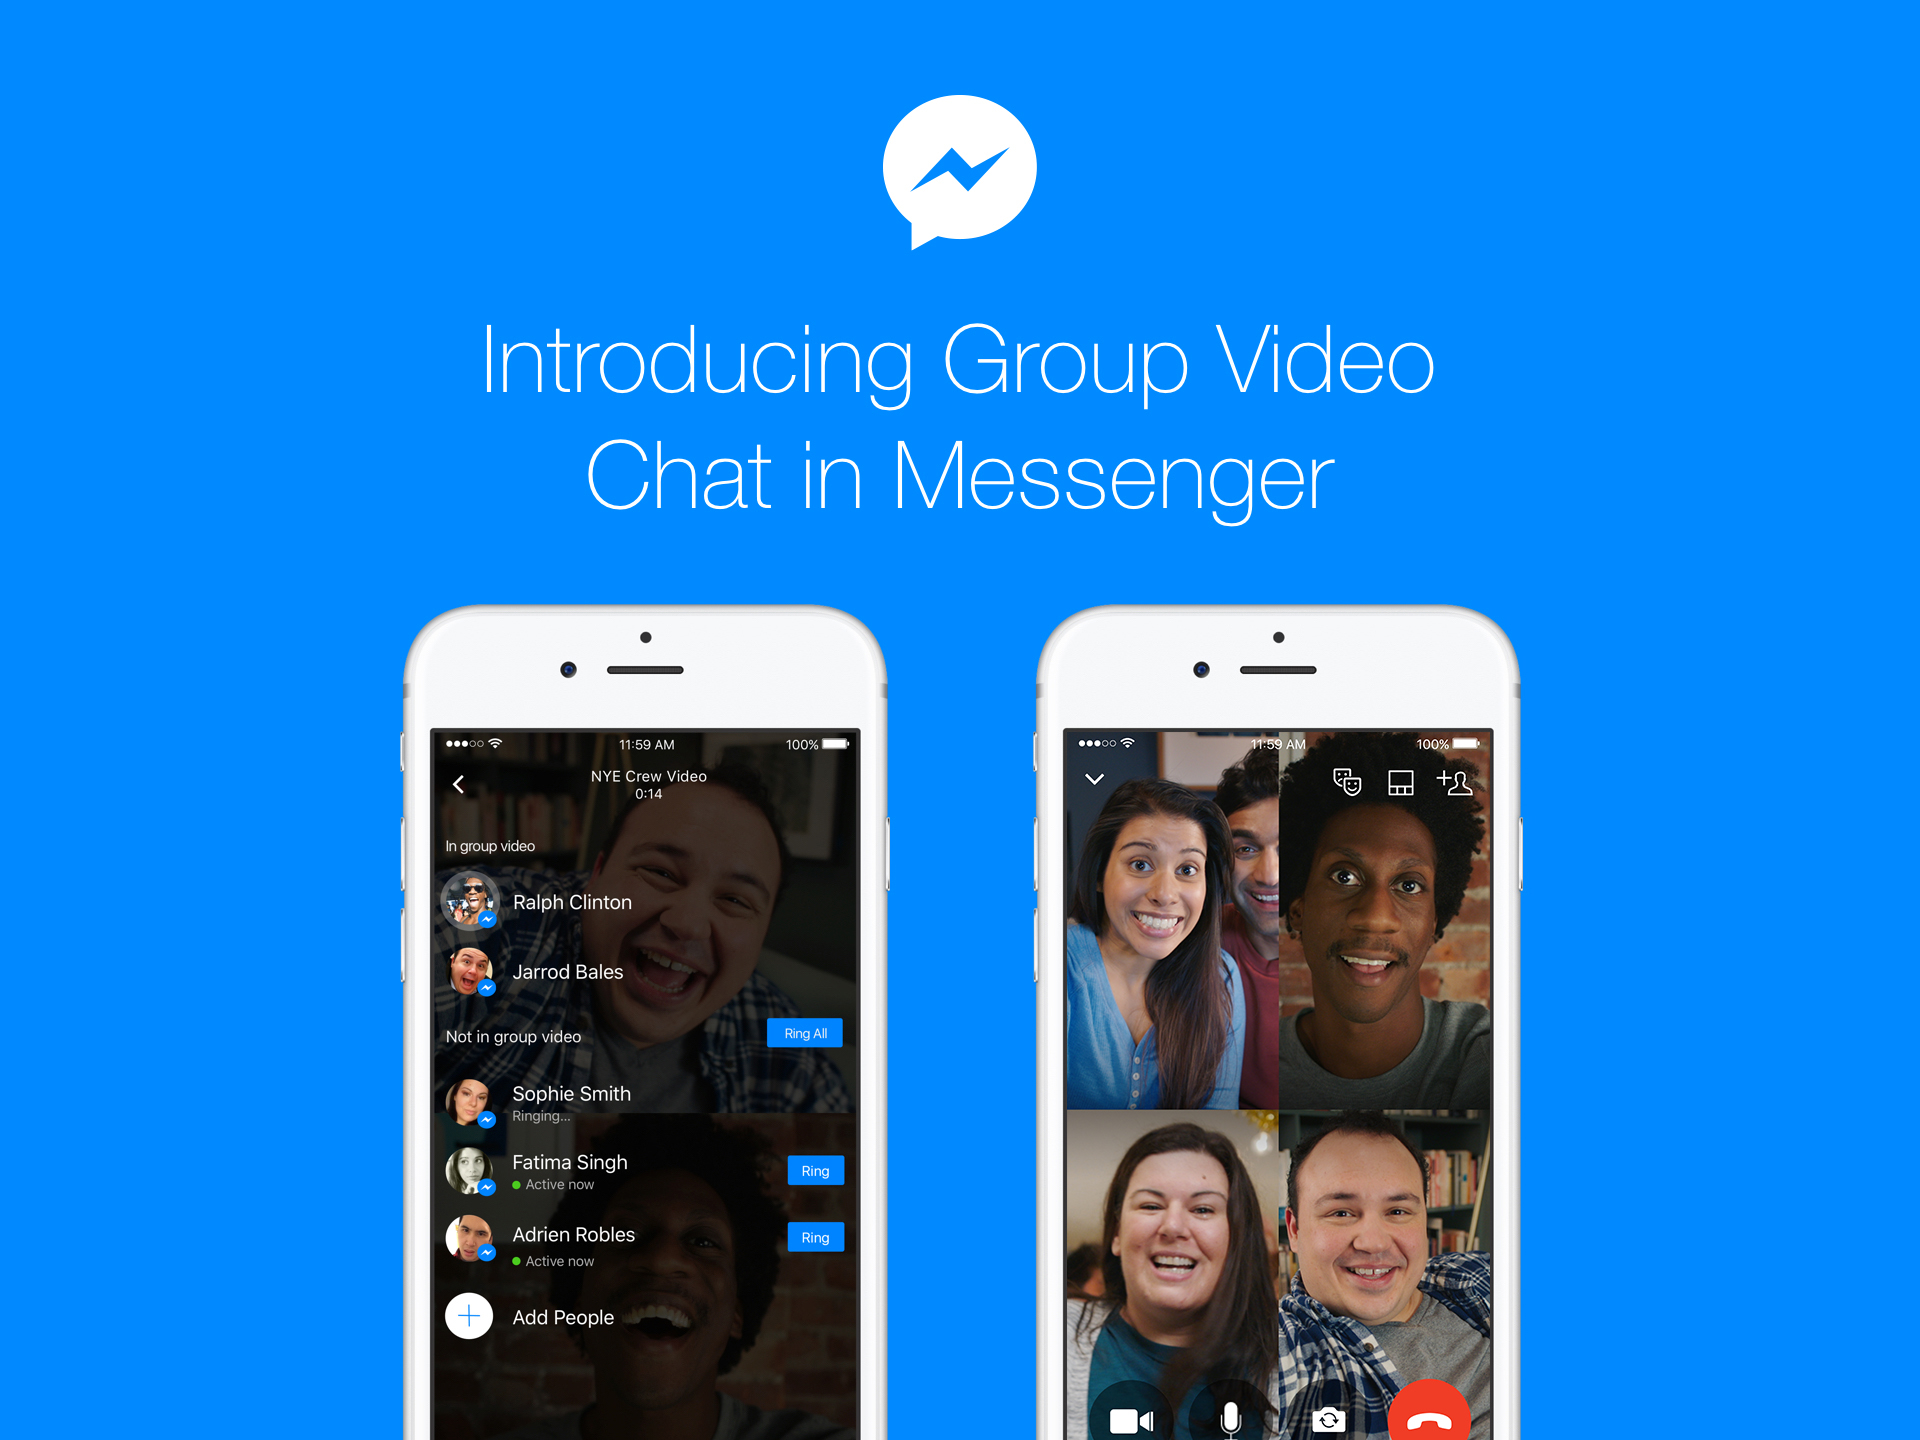 Facebook Video Chat